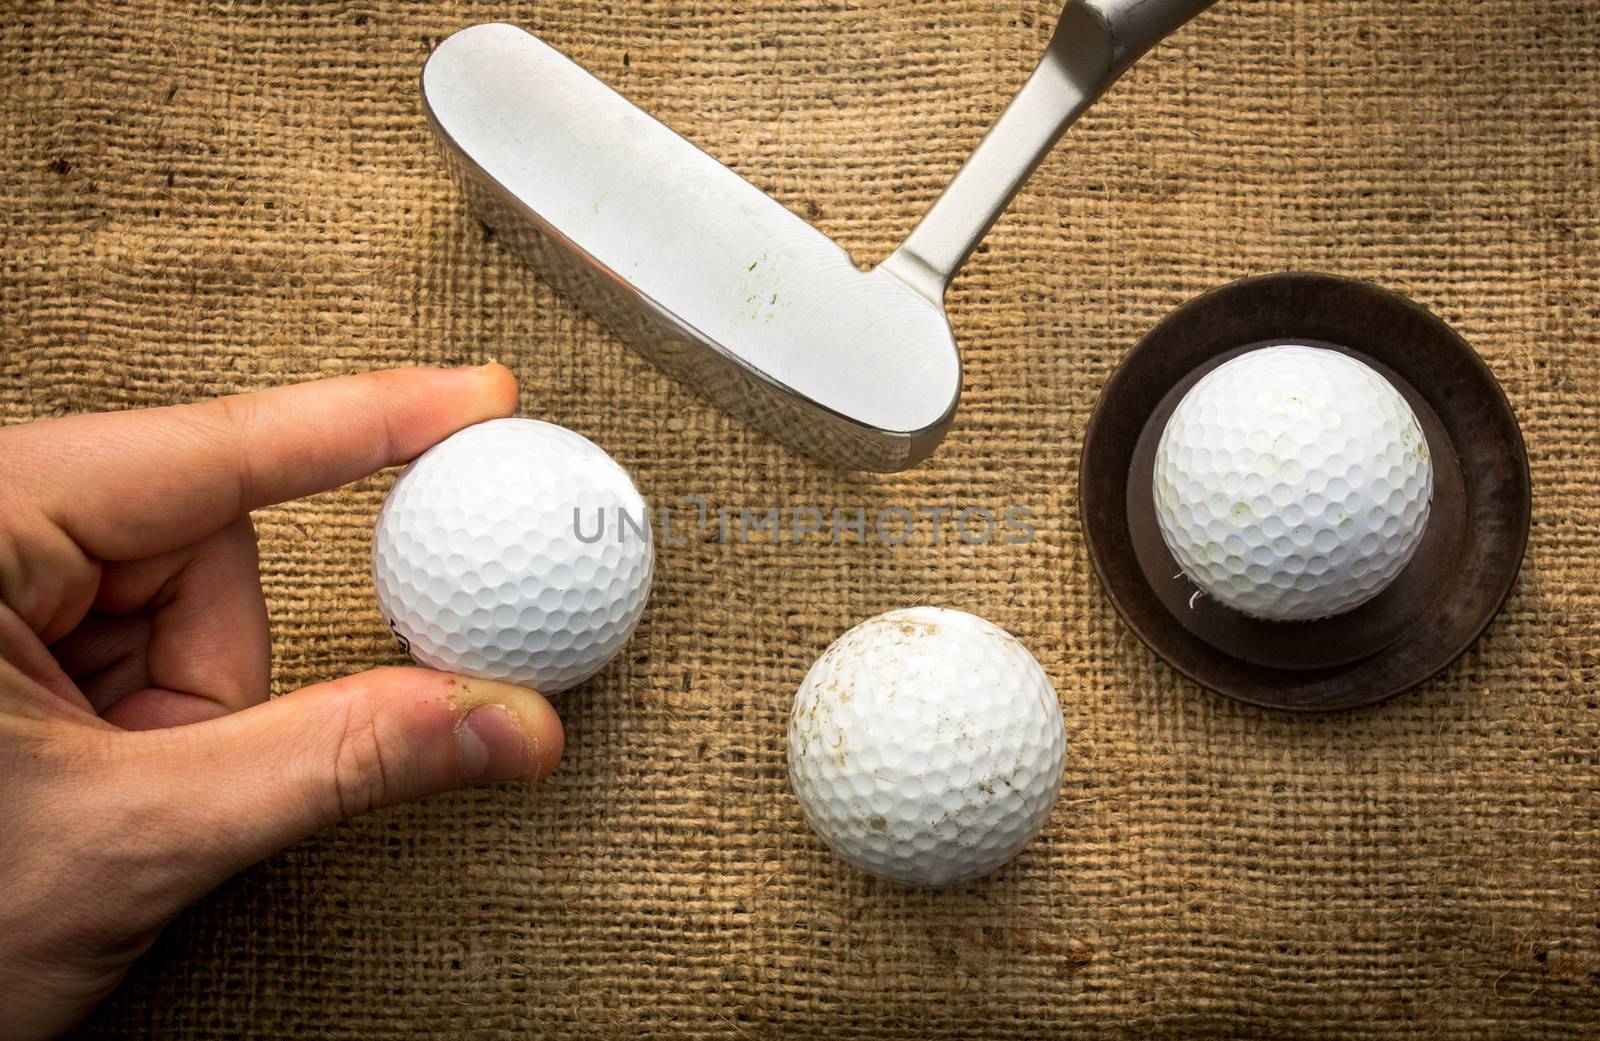 A hand holding a golf ball near a putter and two other golf balls